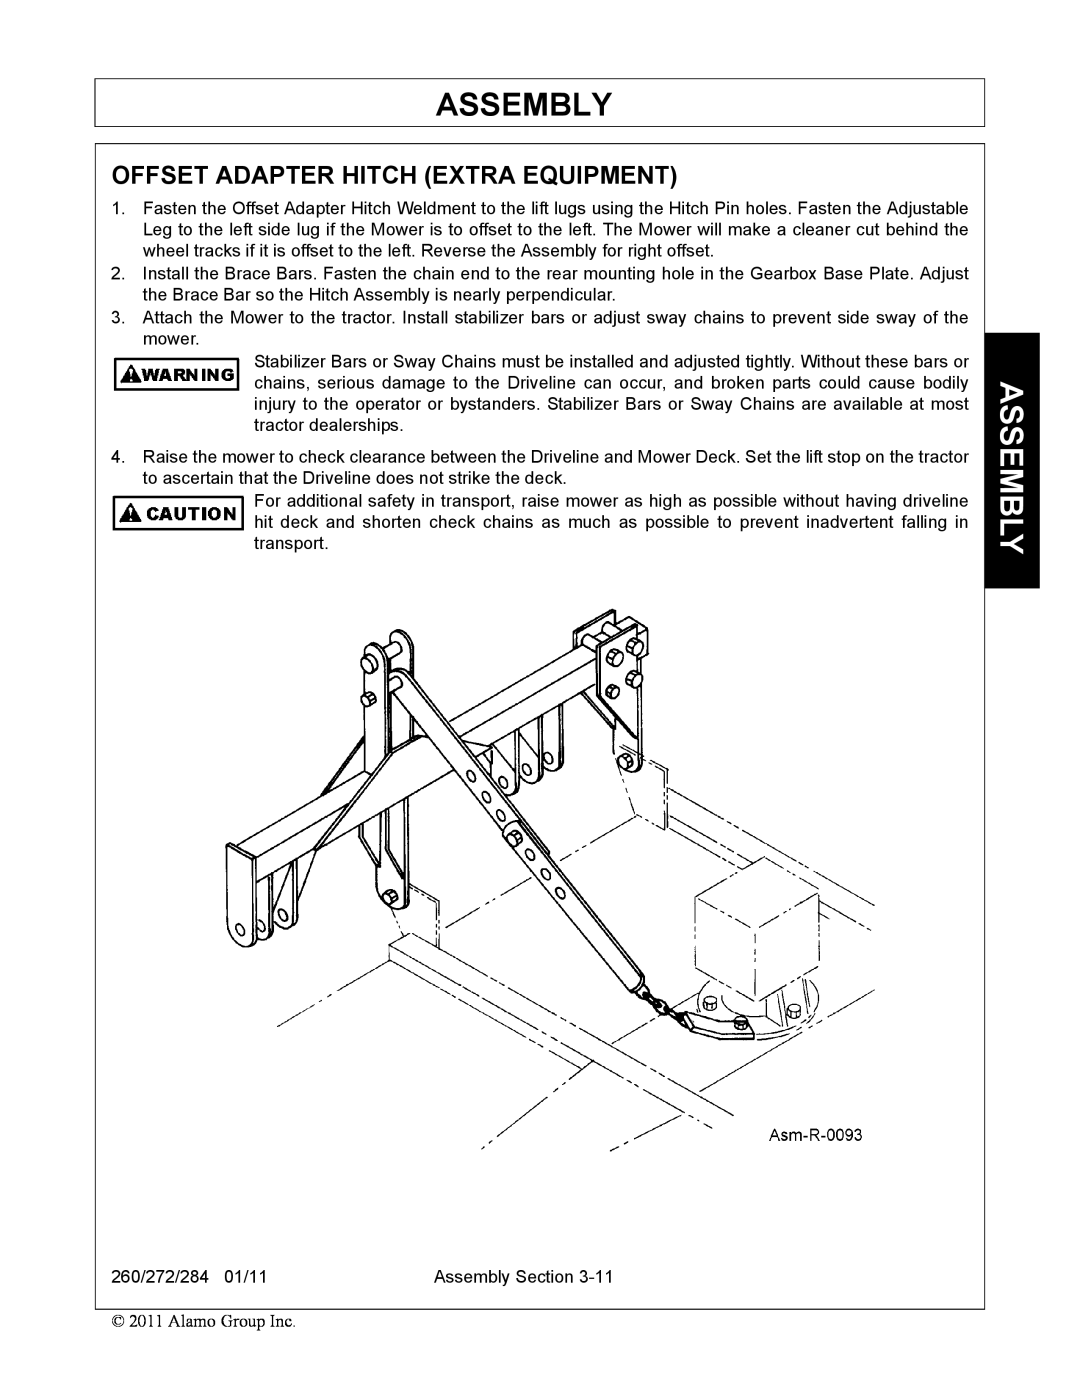 Alamo 284, 260, 272 manual Offset Adapter Hitch Extra Equipment, Assembly 